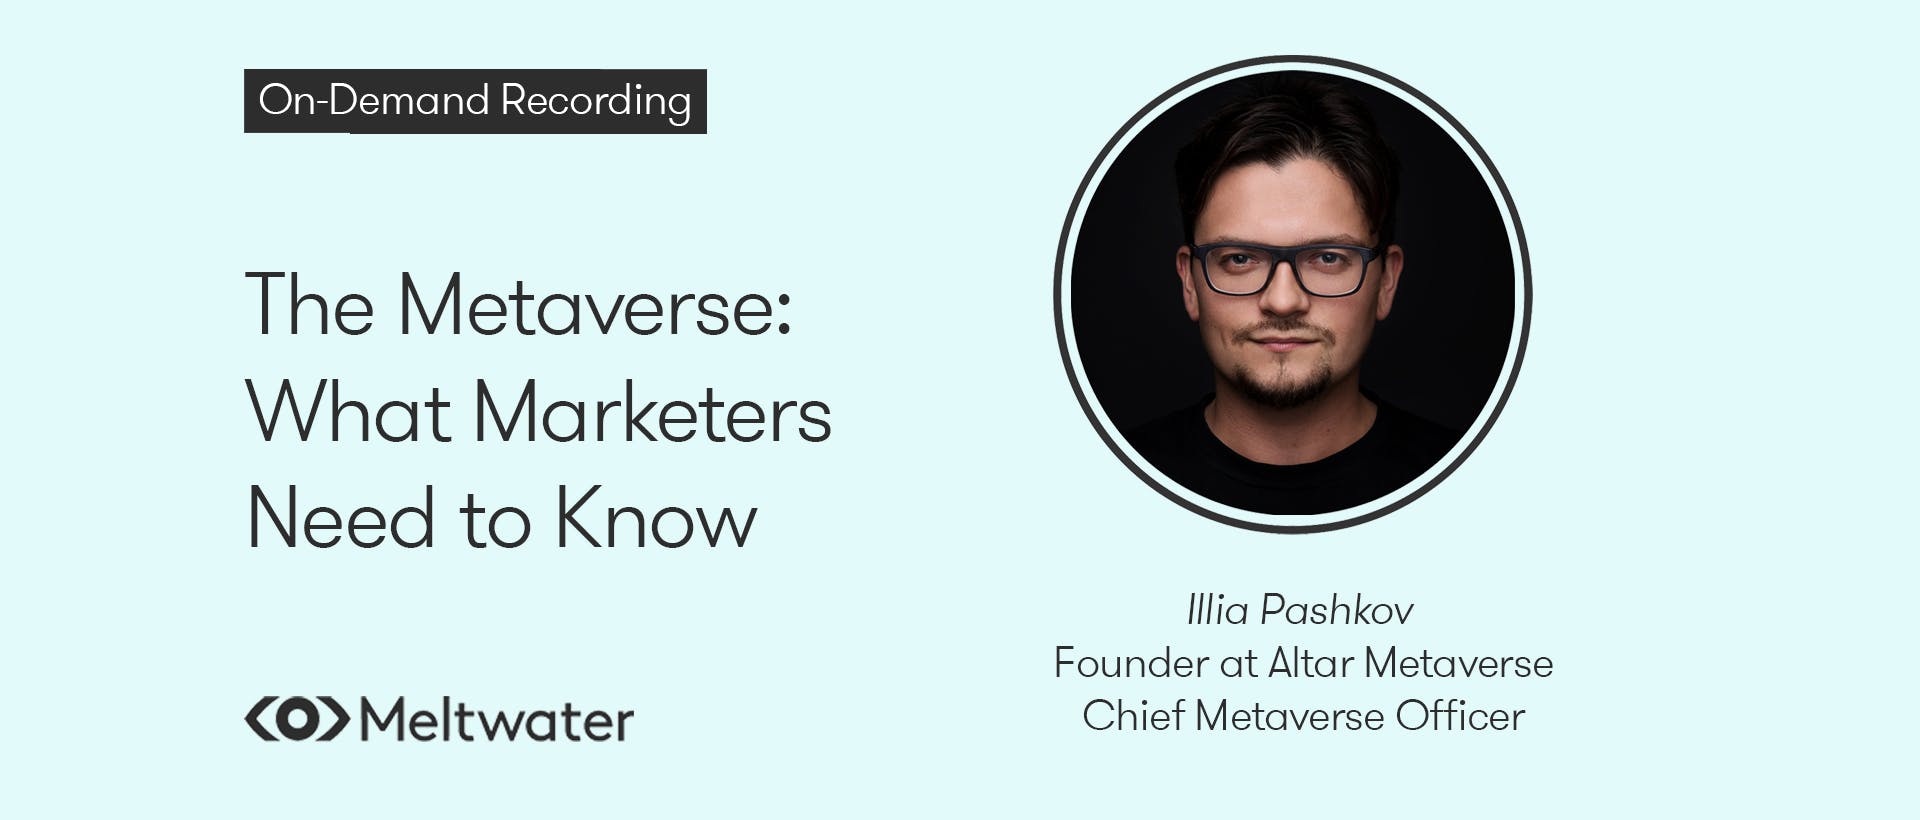 The Metaverse: What Marketers Need to Know (On Demand Recording) Meltwater Webinar